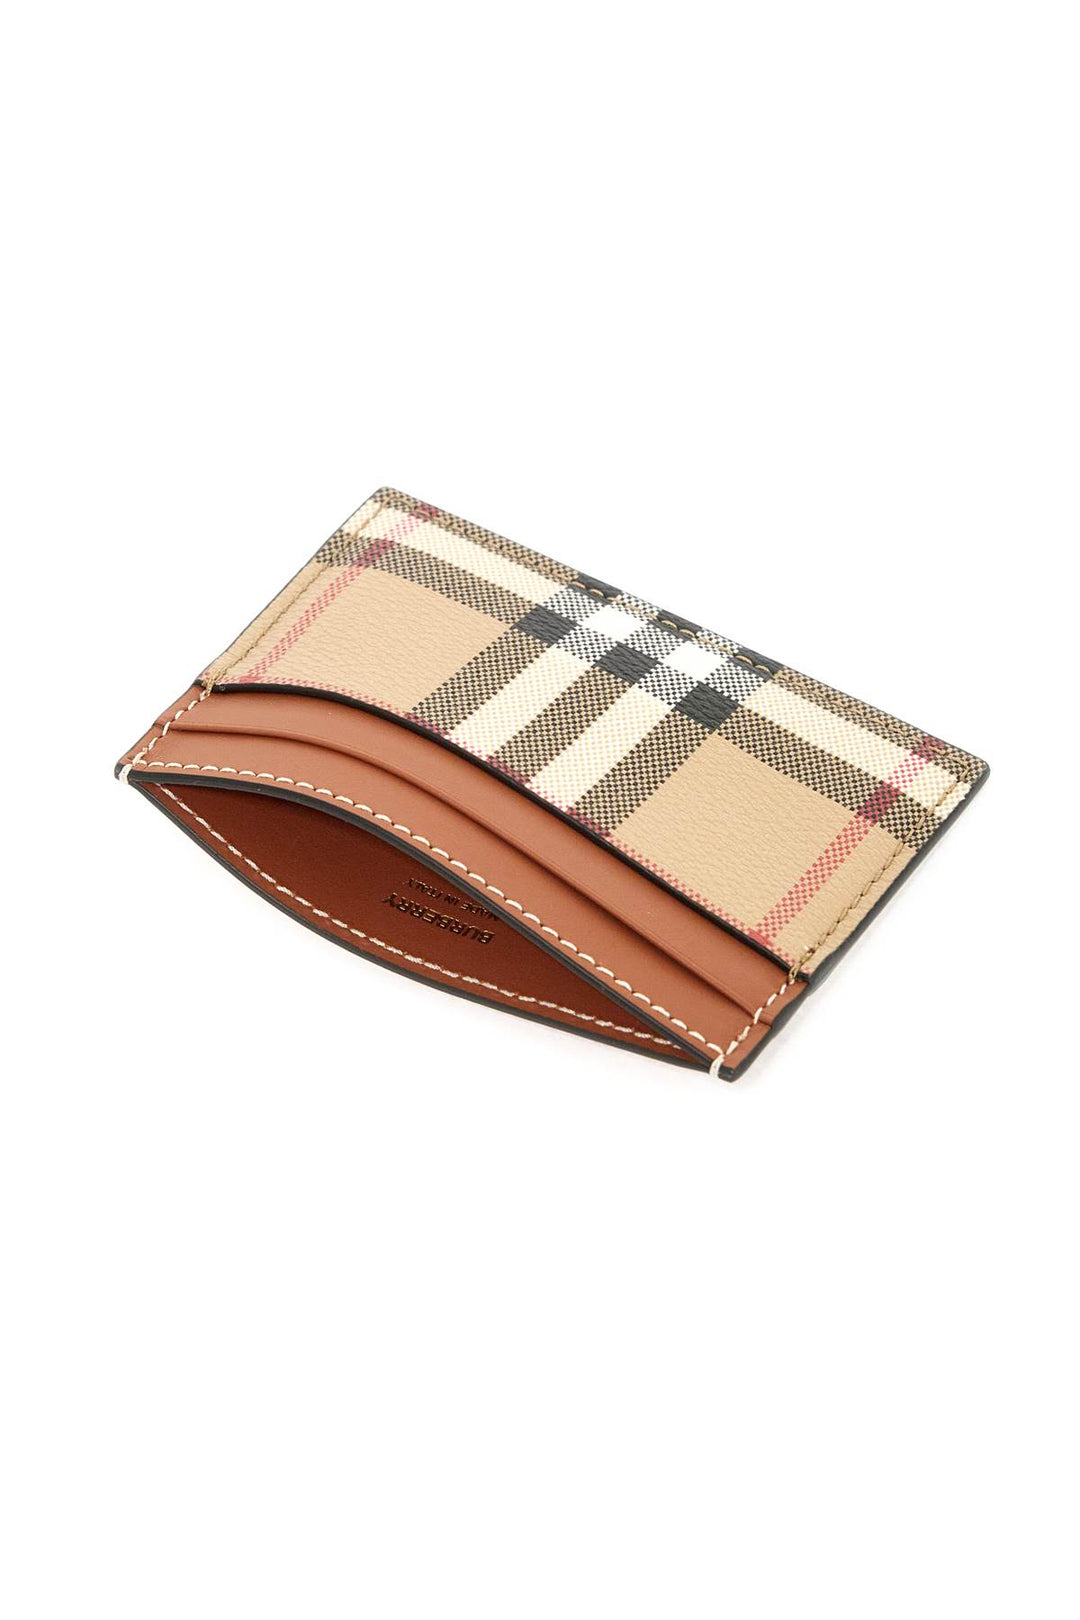 Burberry Book Holder In Faux Leather   Beige